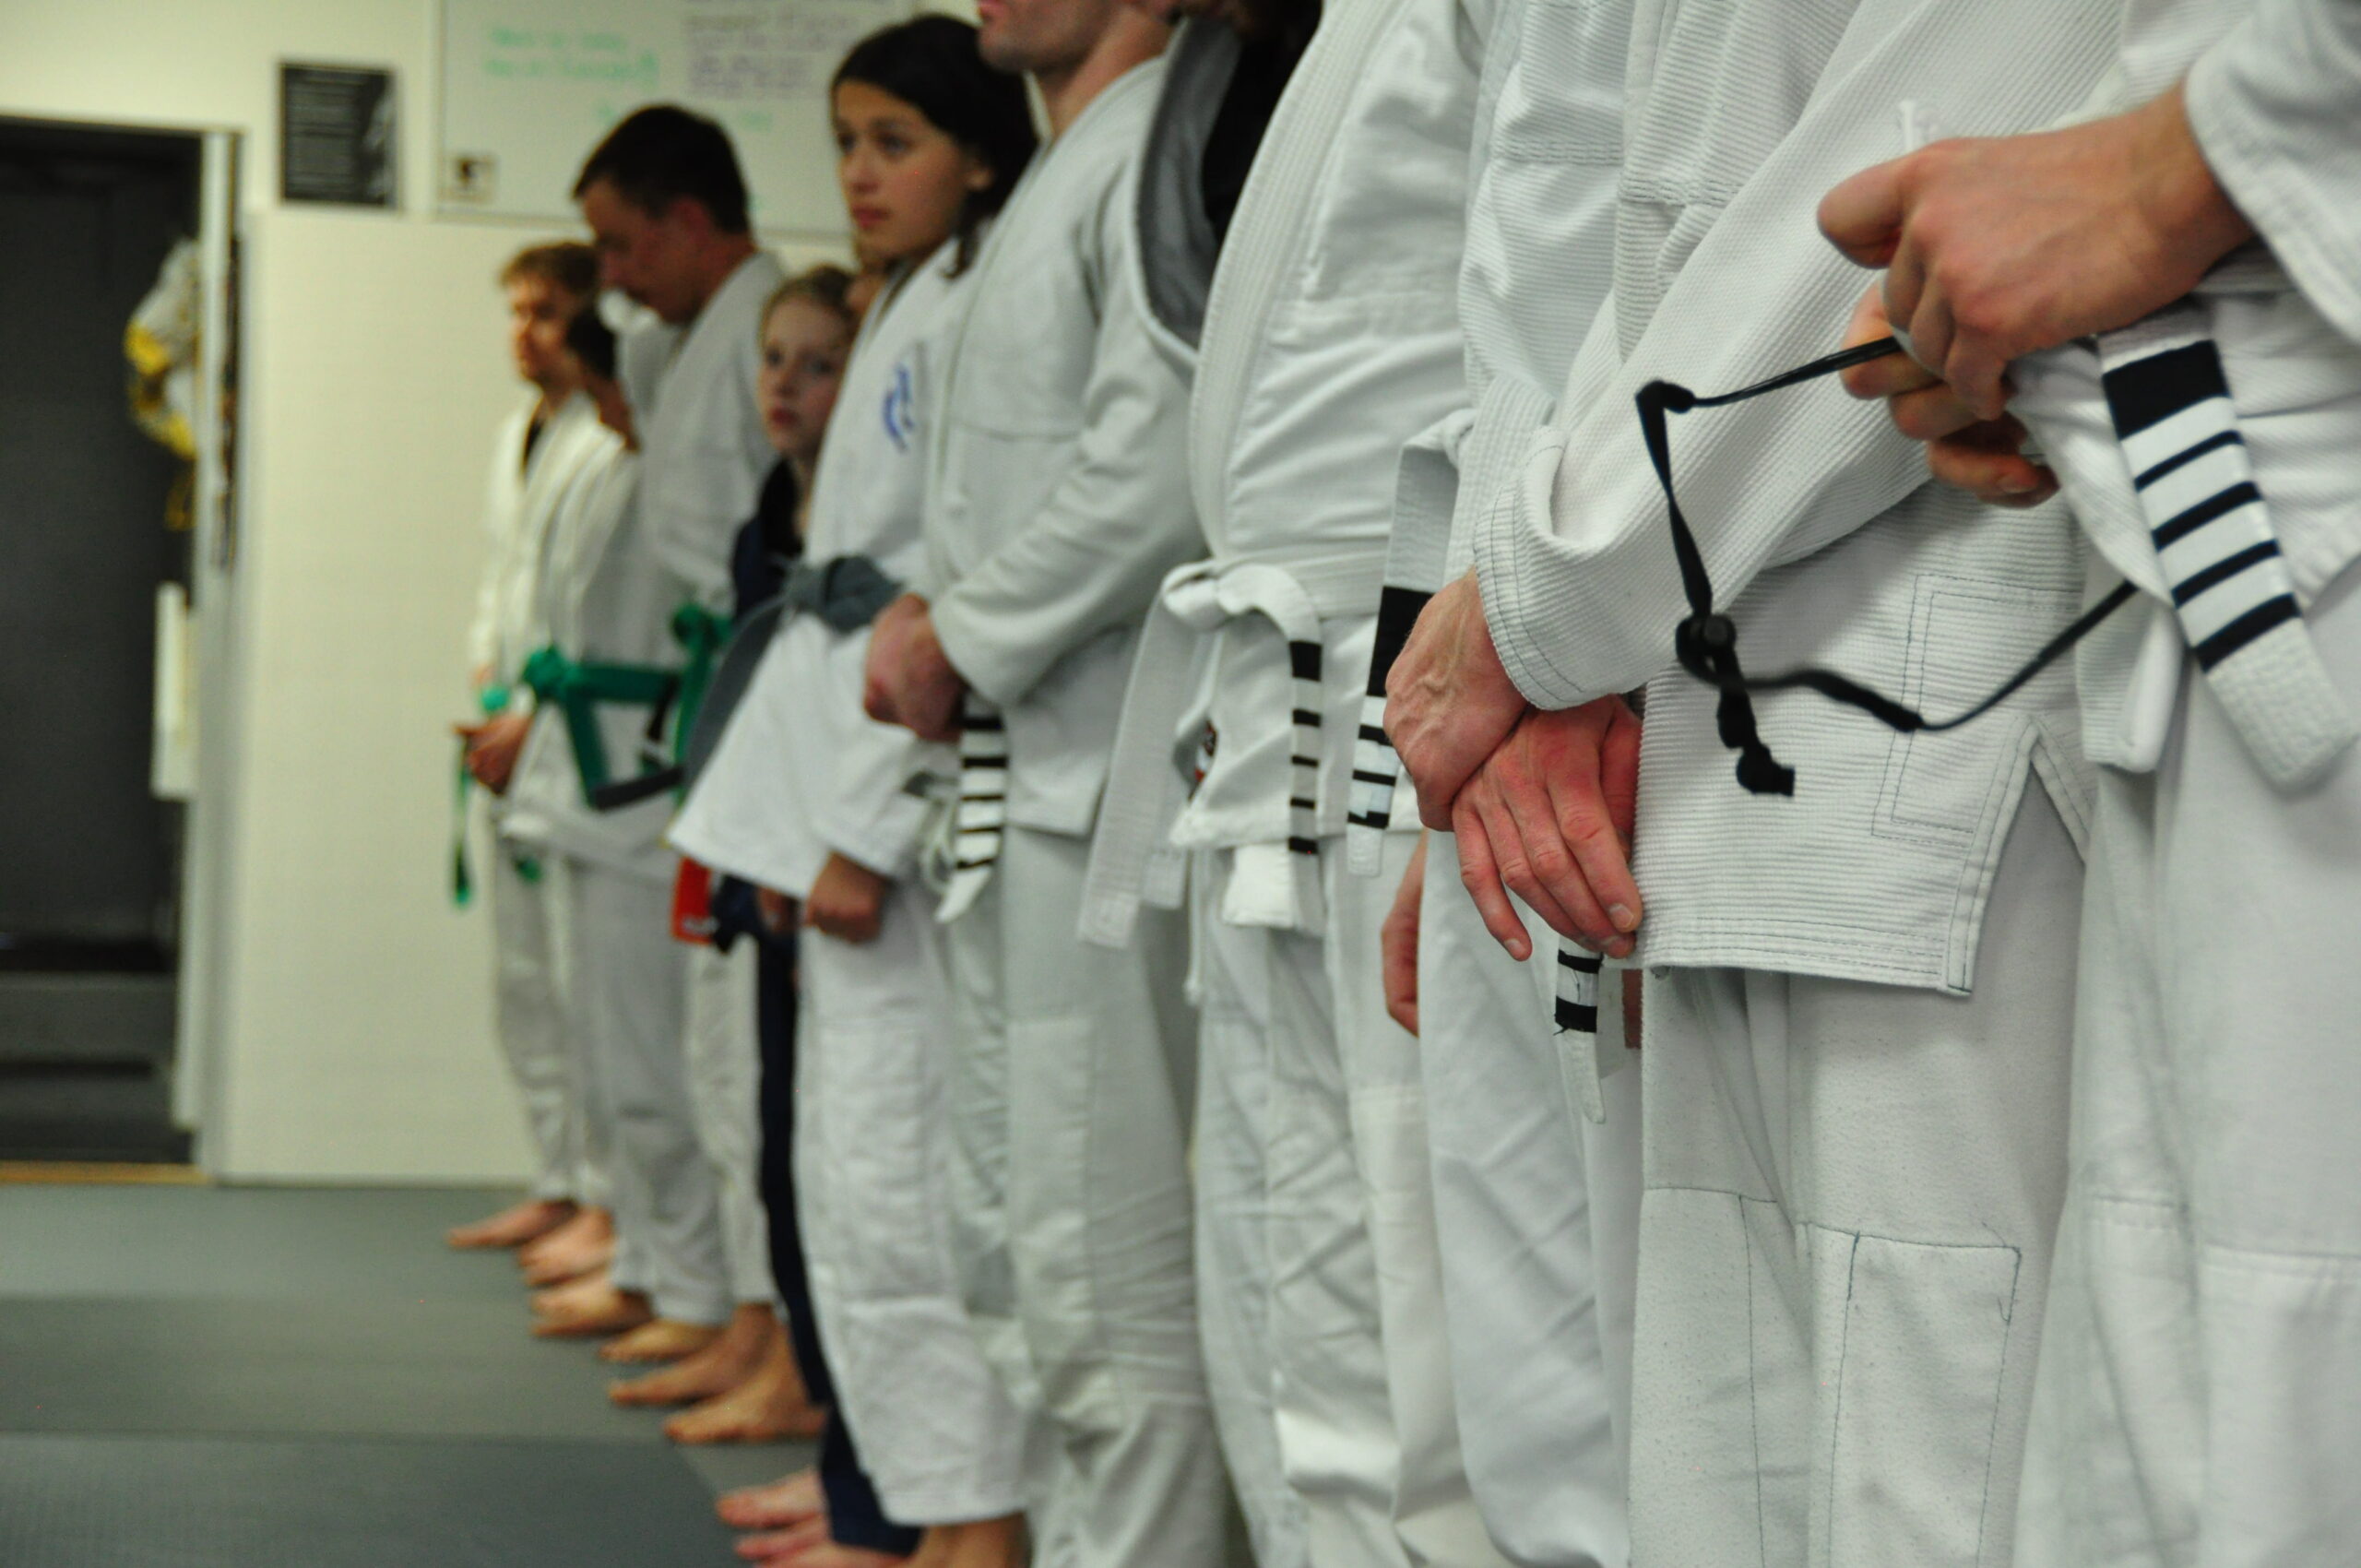 8 things you should know for your first month of Brazilian Jiu